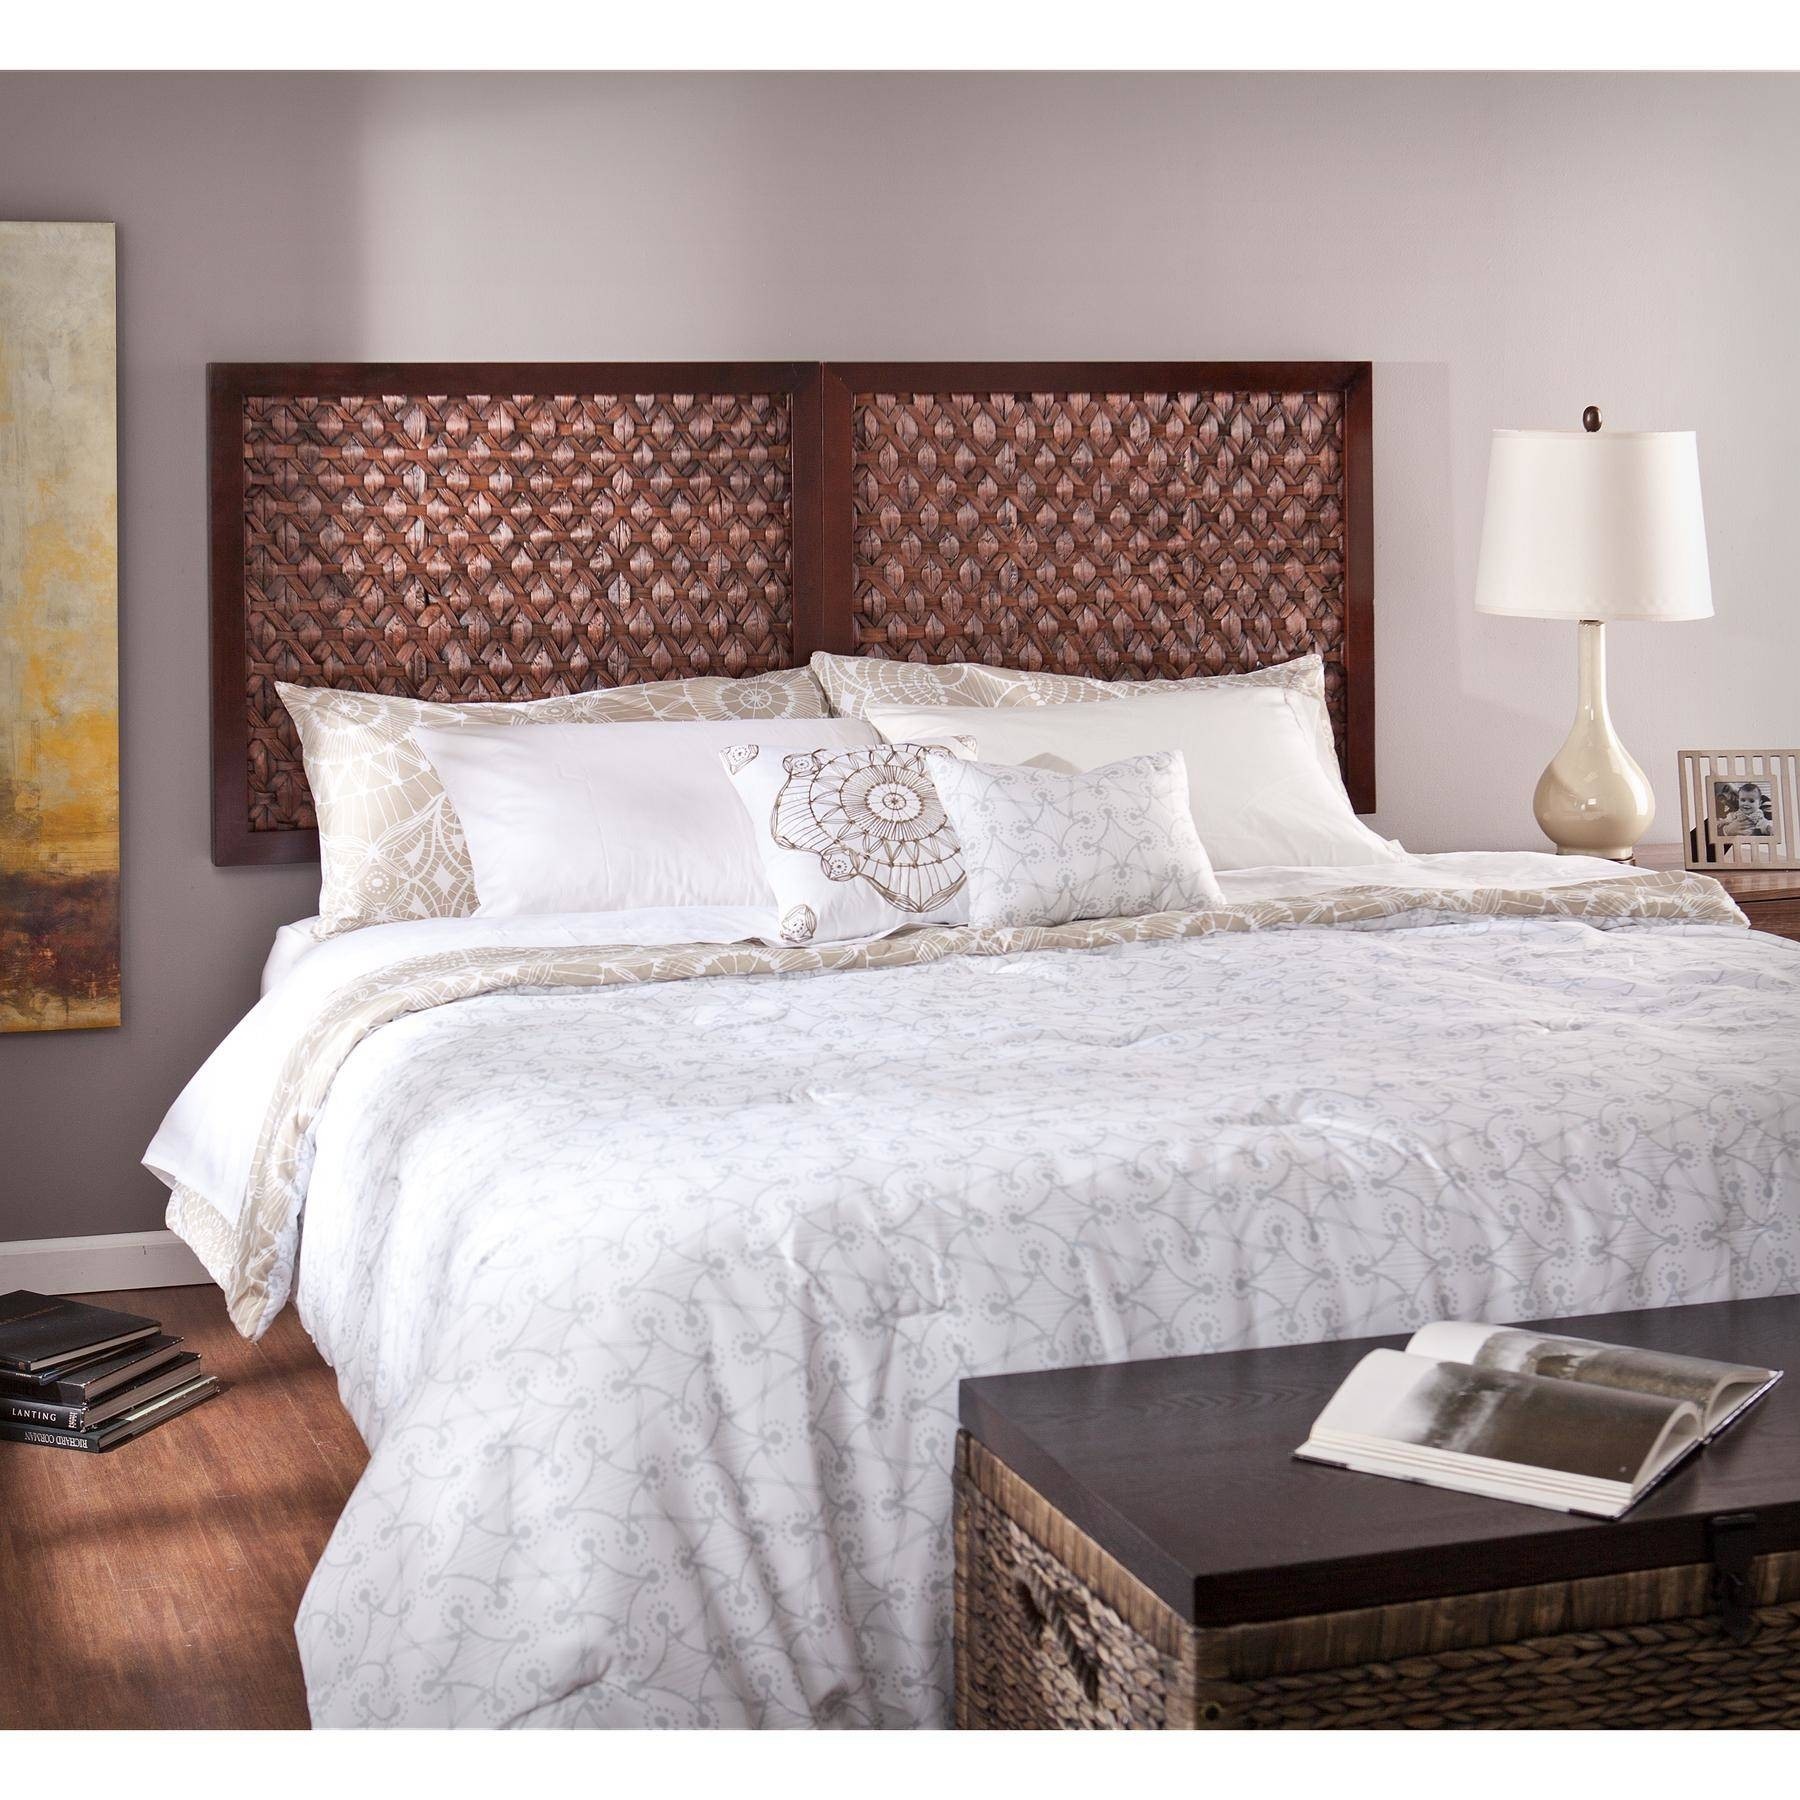 Simple wall mounted headboard ideas placement the inductive